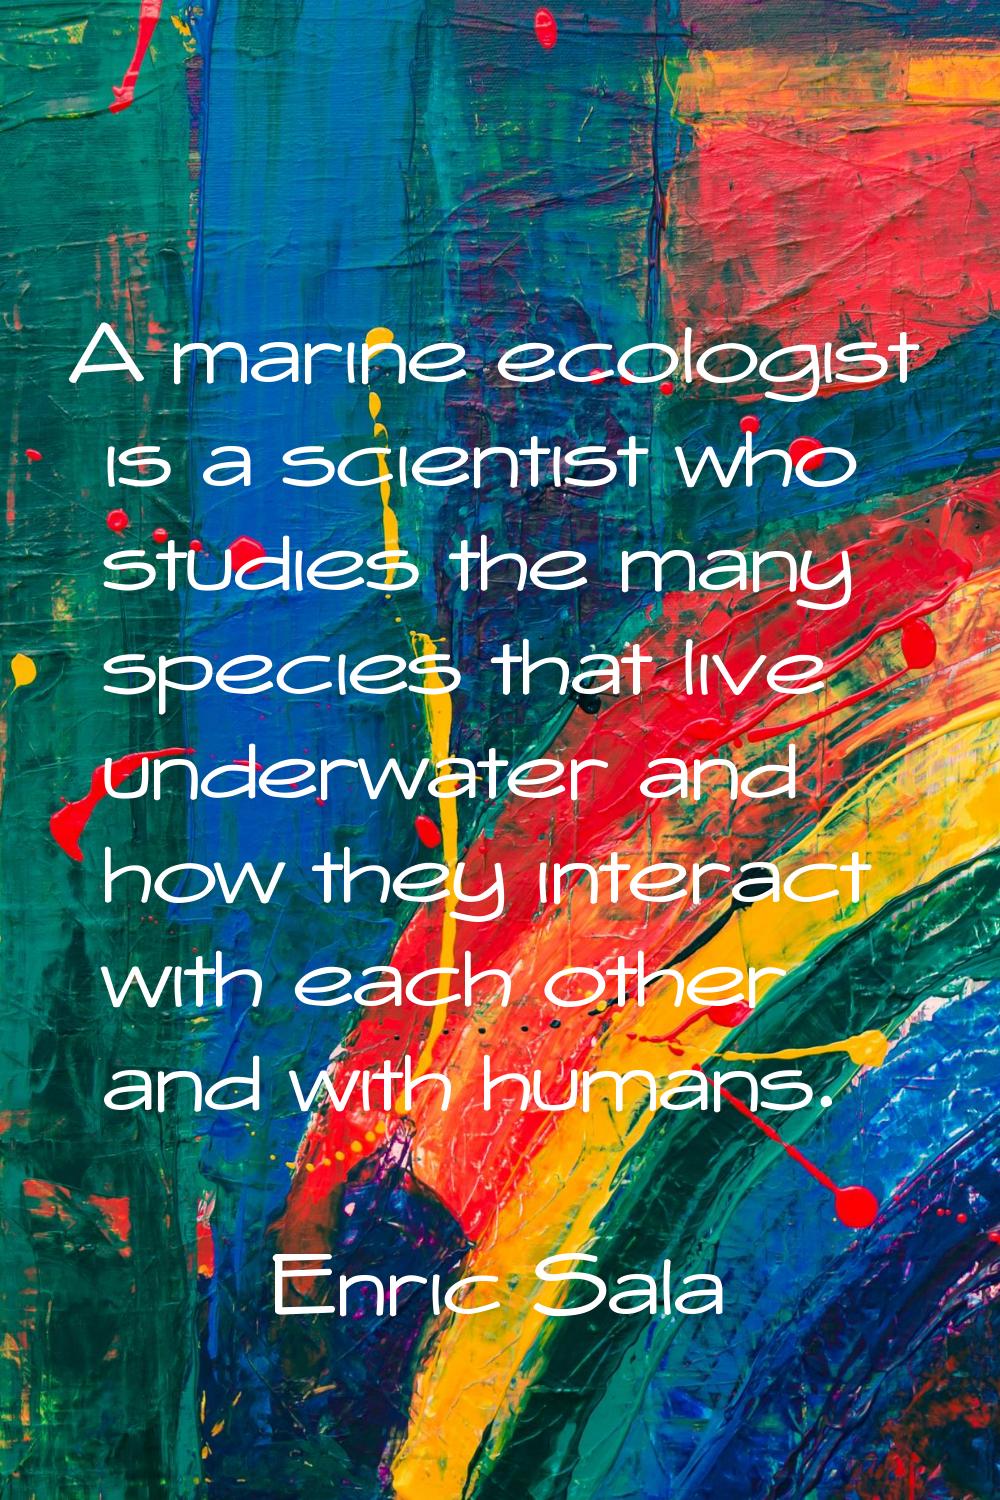 A marine ecologist is a scientist who studies the many species that live underwater and how they in